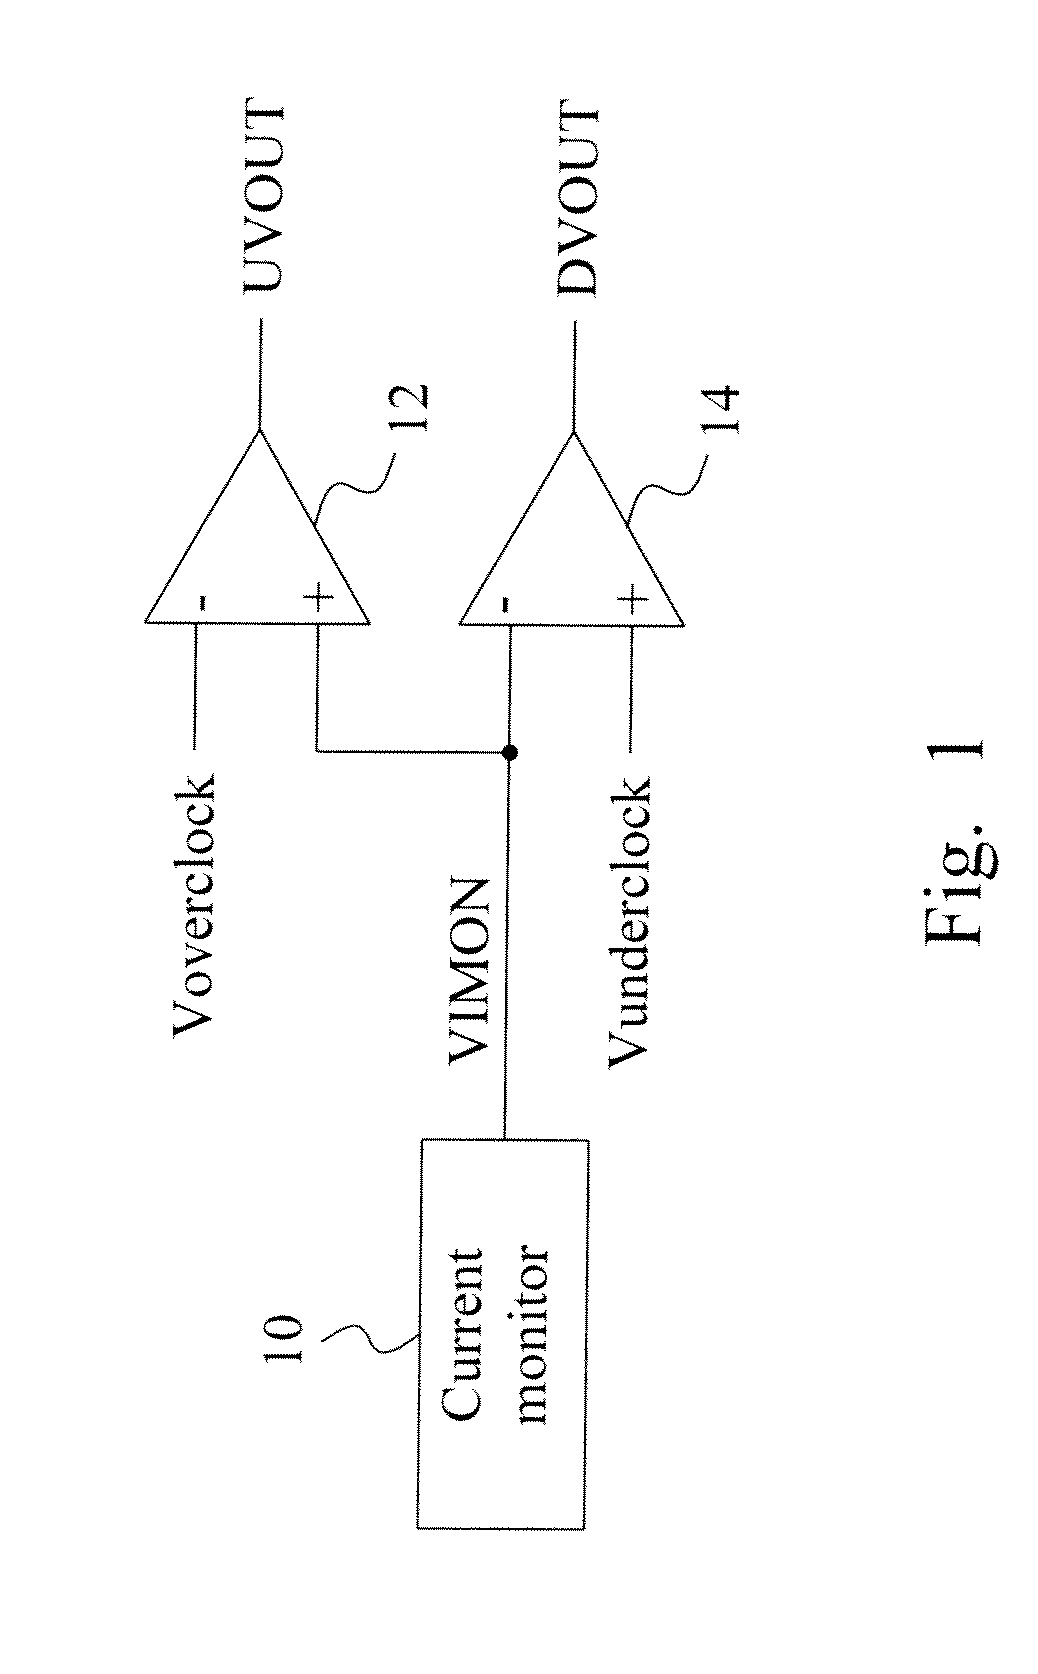 Voltage regulator having an output voltage automatically adjusted according to a load current